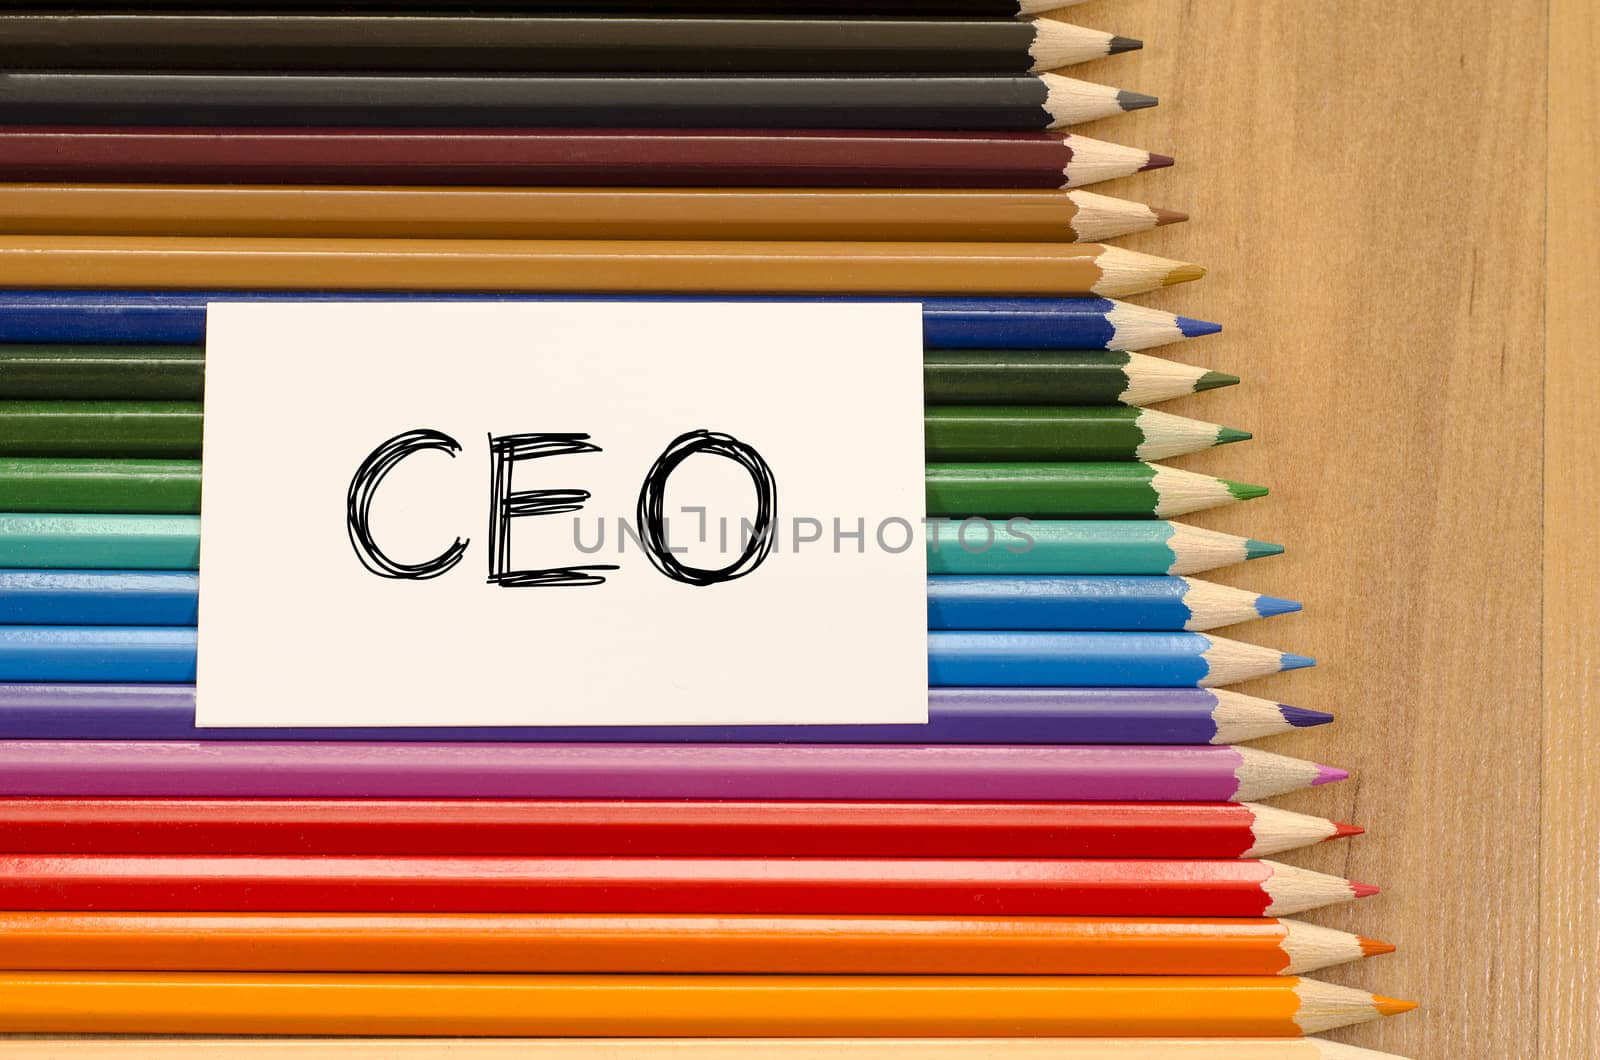 Ceo text concept and colored pencil on wooden background